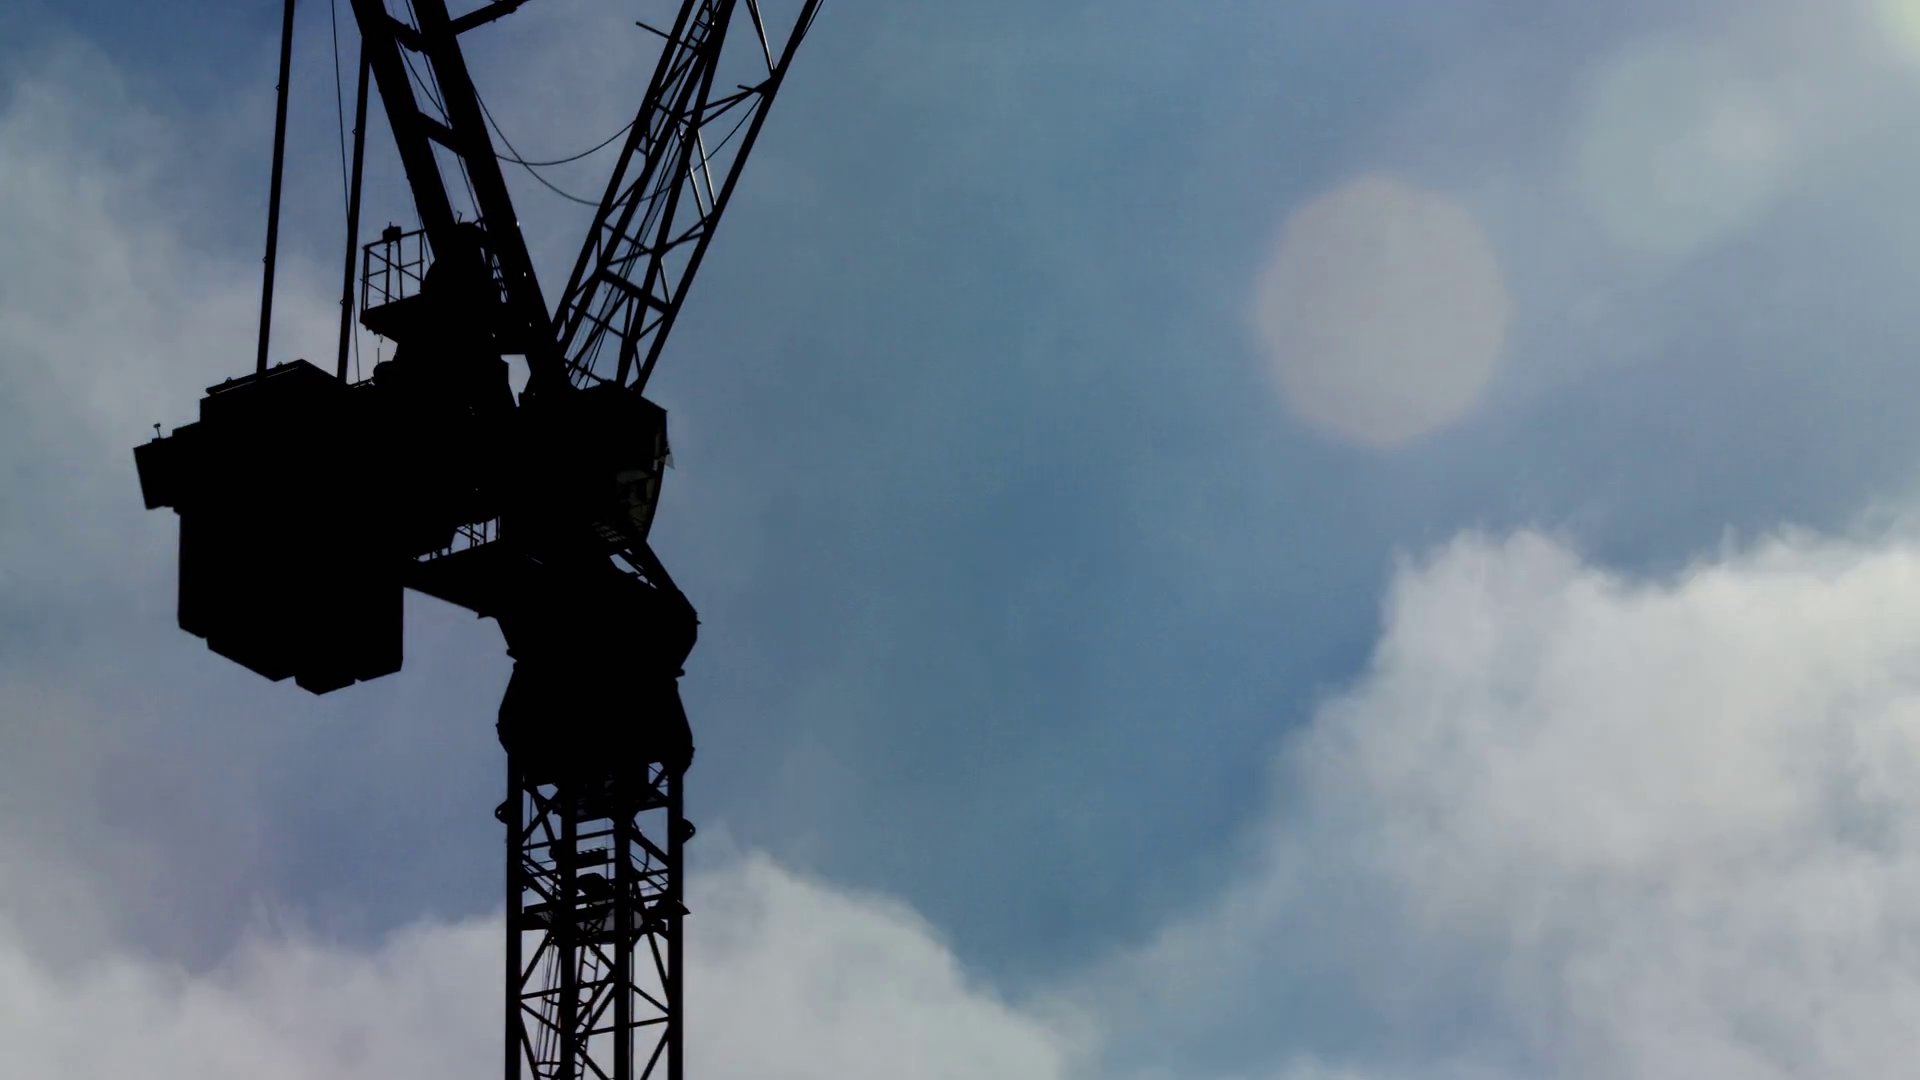 Time lapse of clouds rolling past an industrial crane during the ...